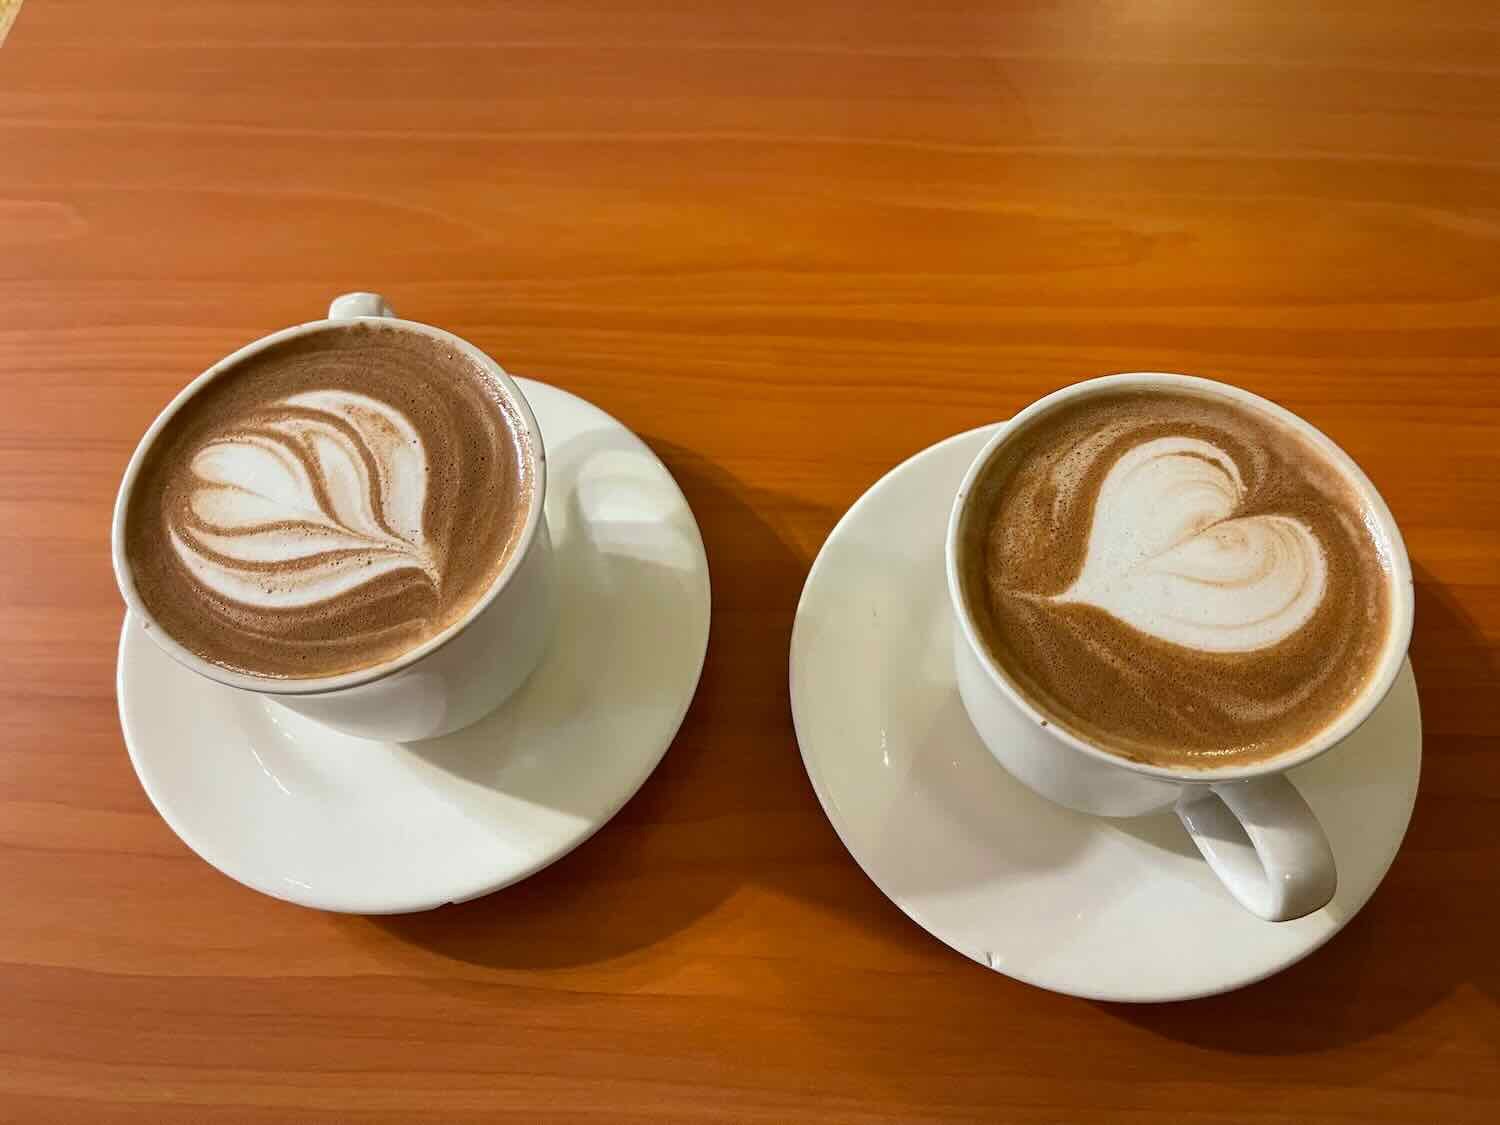 Steaming cups of lovingly-prepared hot chocolate